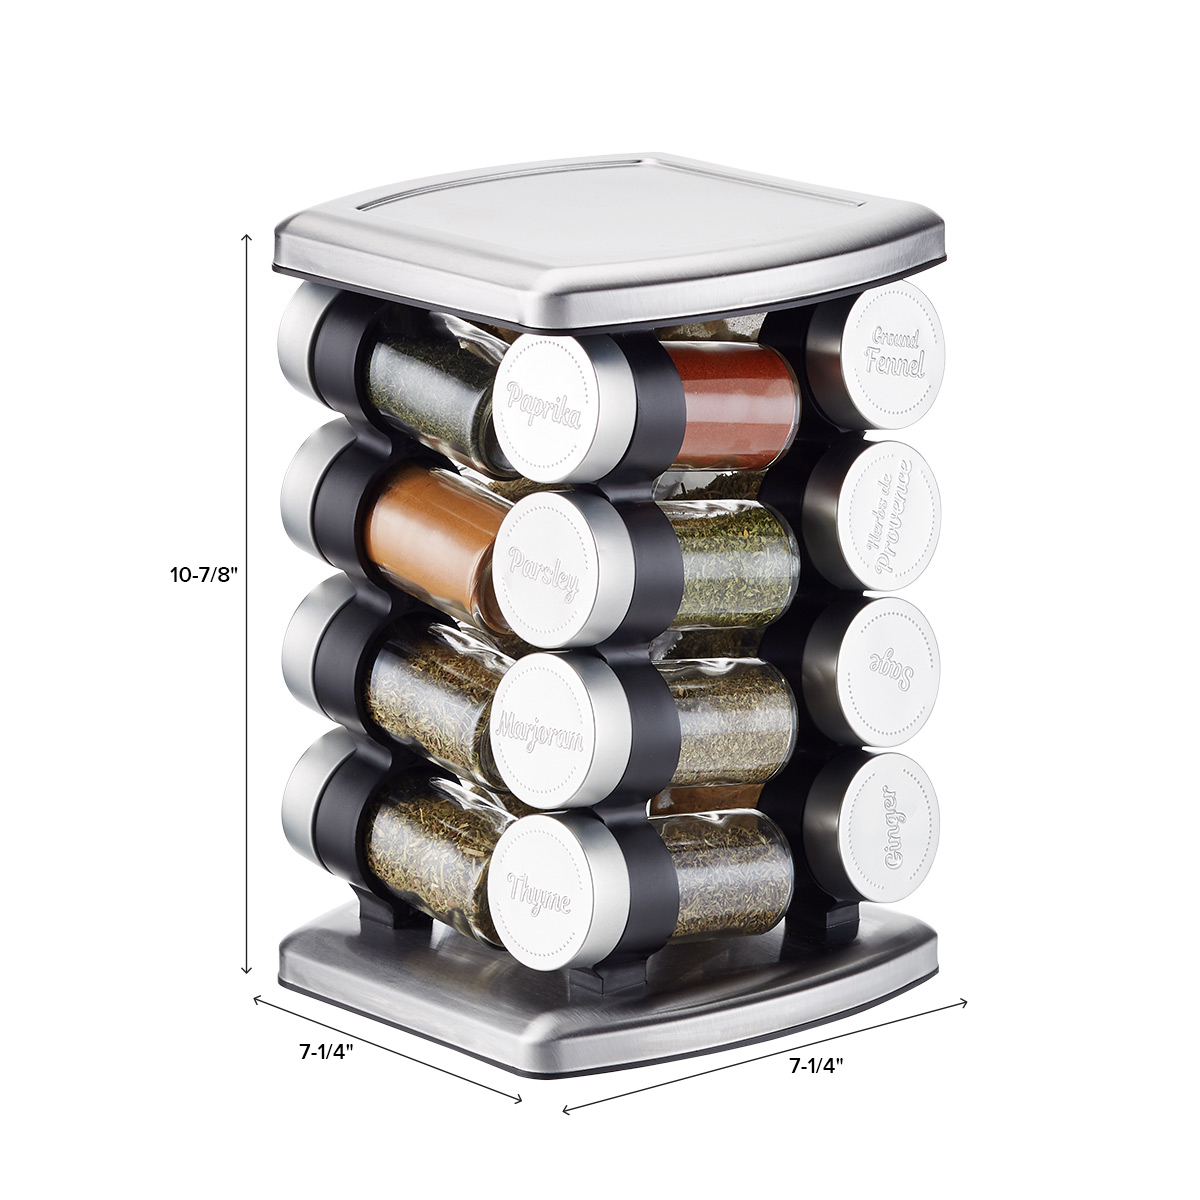 4 Jar Spice Rack Filled with Spices